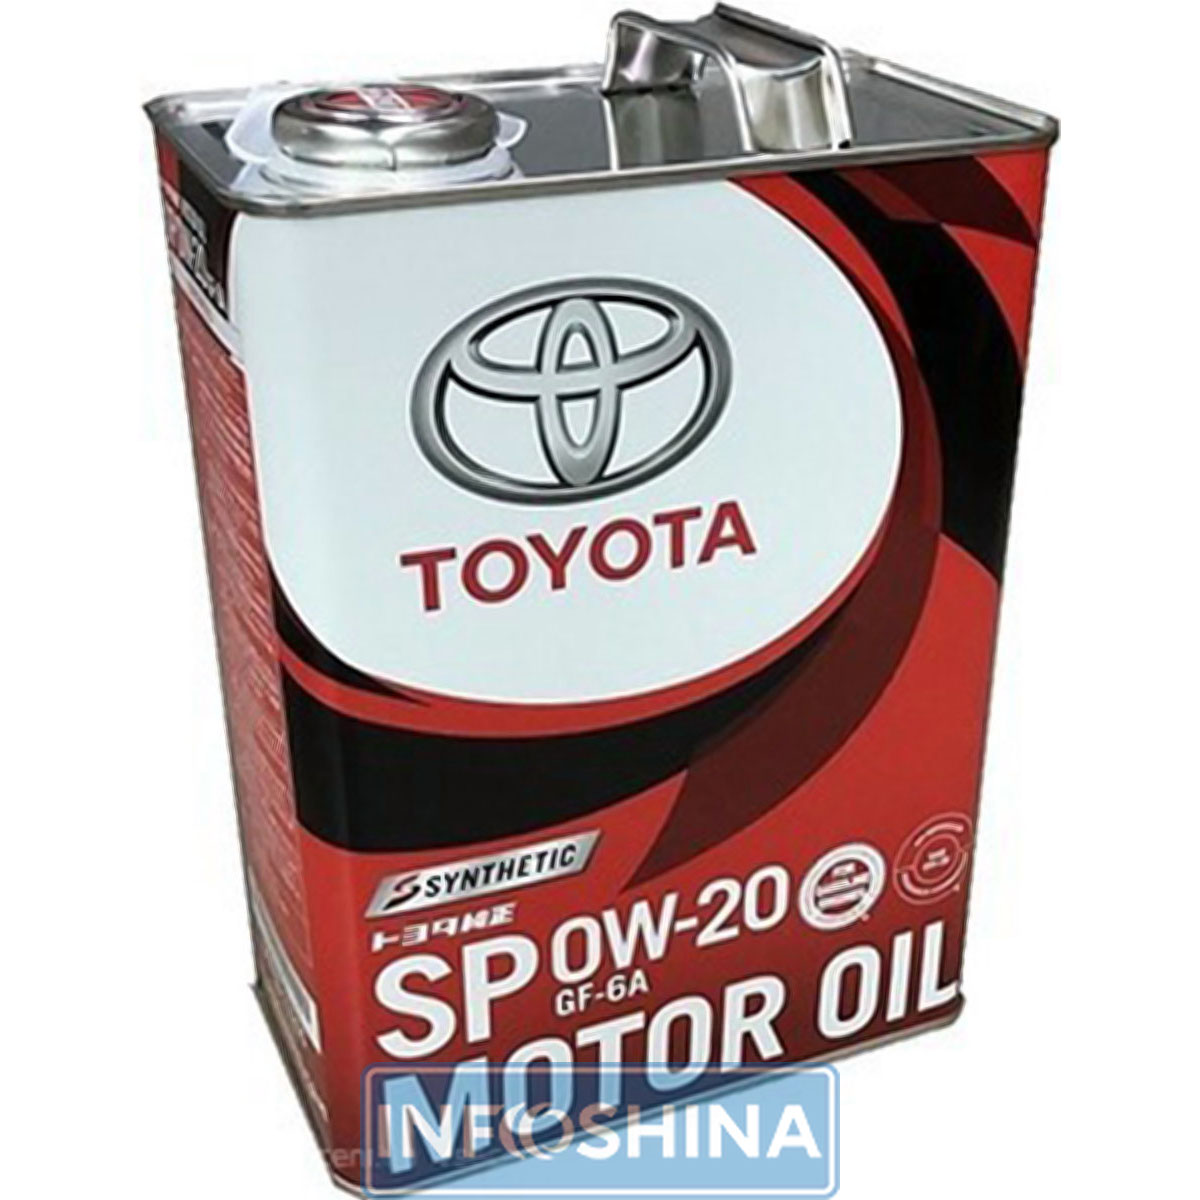 Купити масло Toyota Synthetic Motor Oil 0W-20 SP/GF-6A (1л)